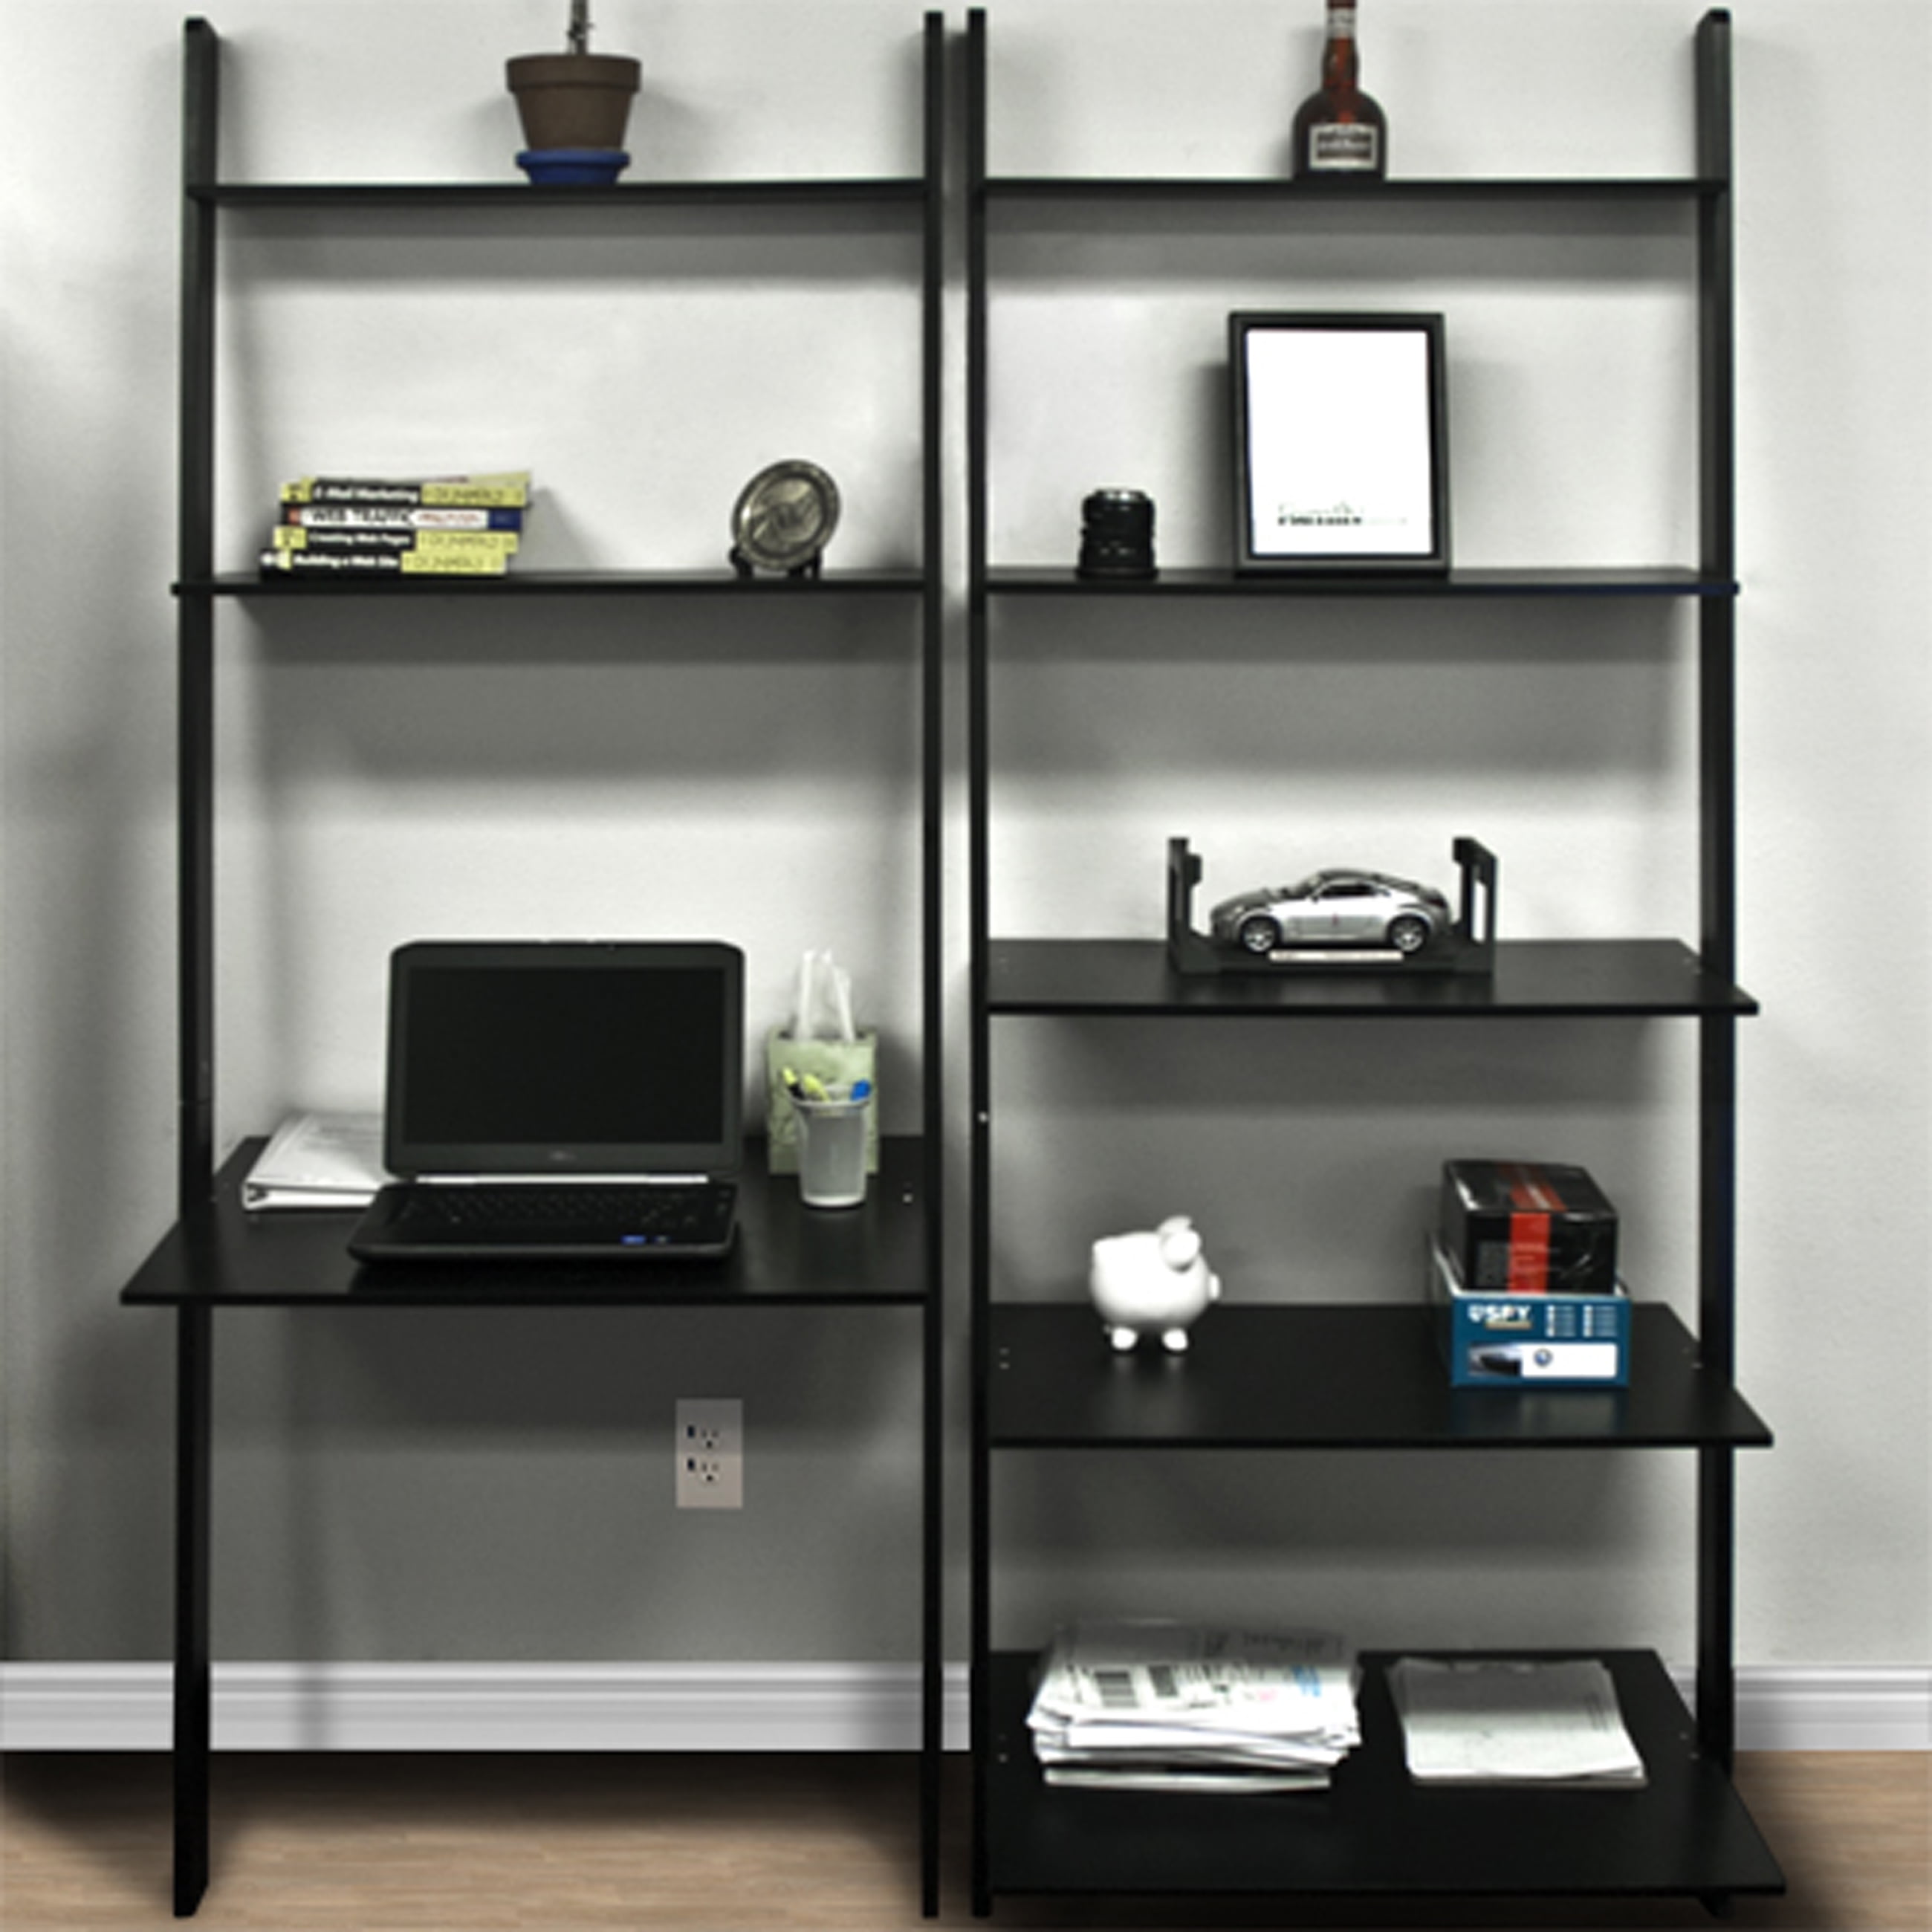 Best Choice Products 7 Shelf Leaning Bookcase And Computer Desk